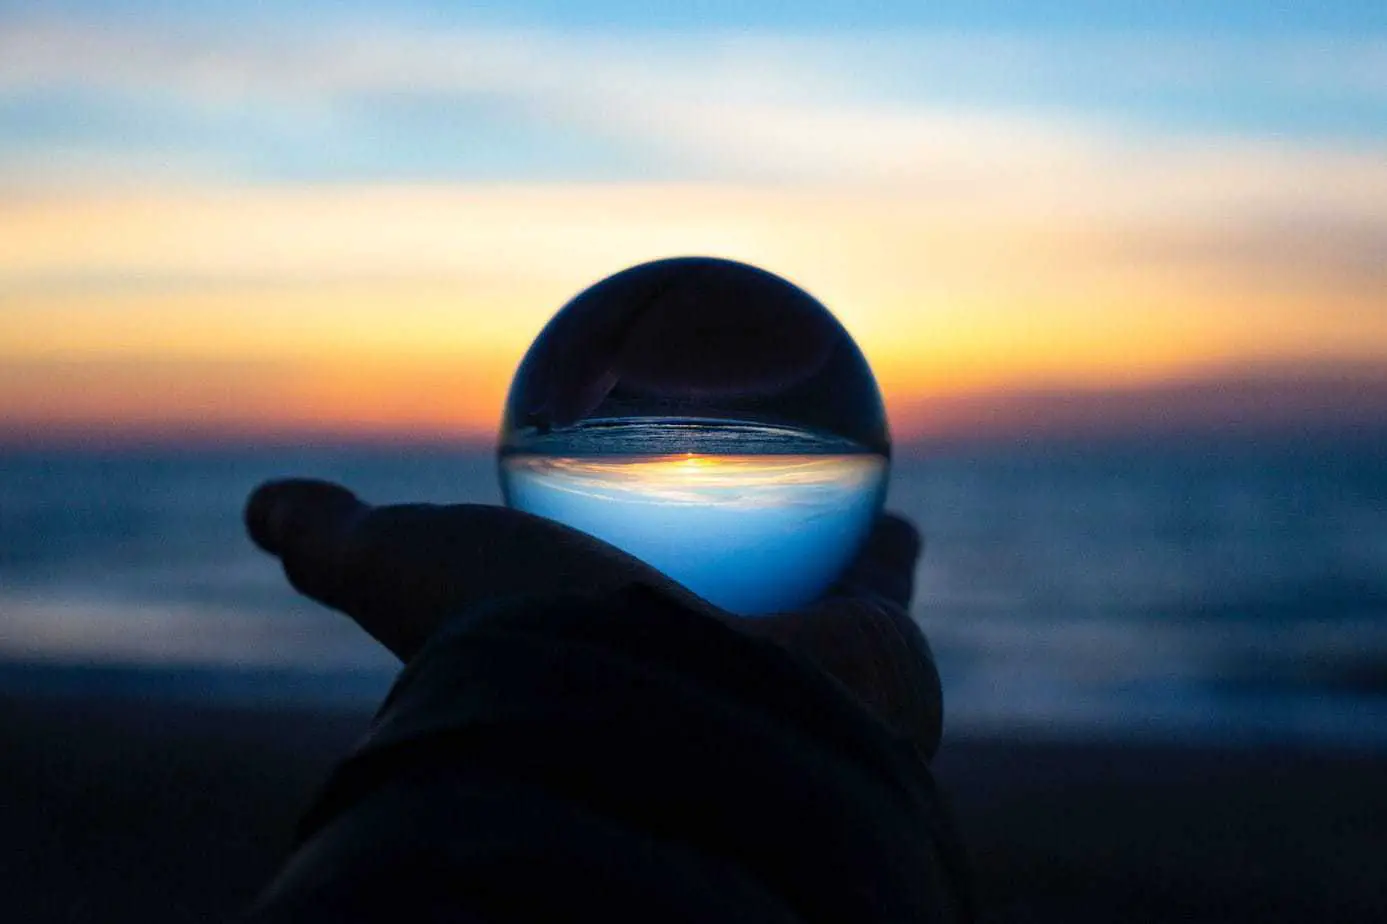 lensball photography on a smartphone